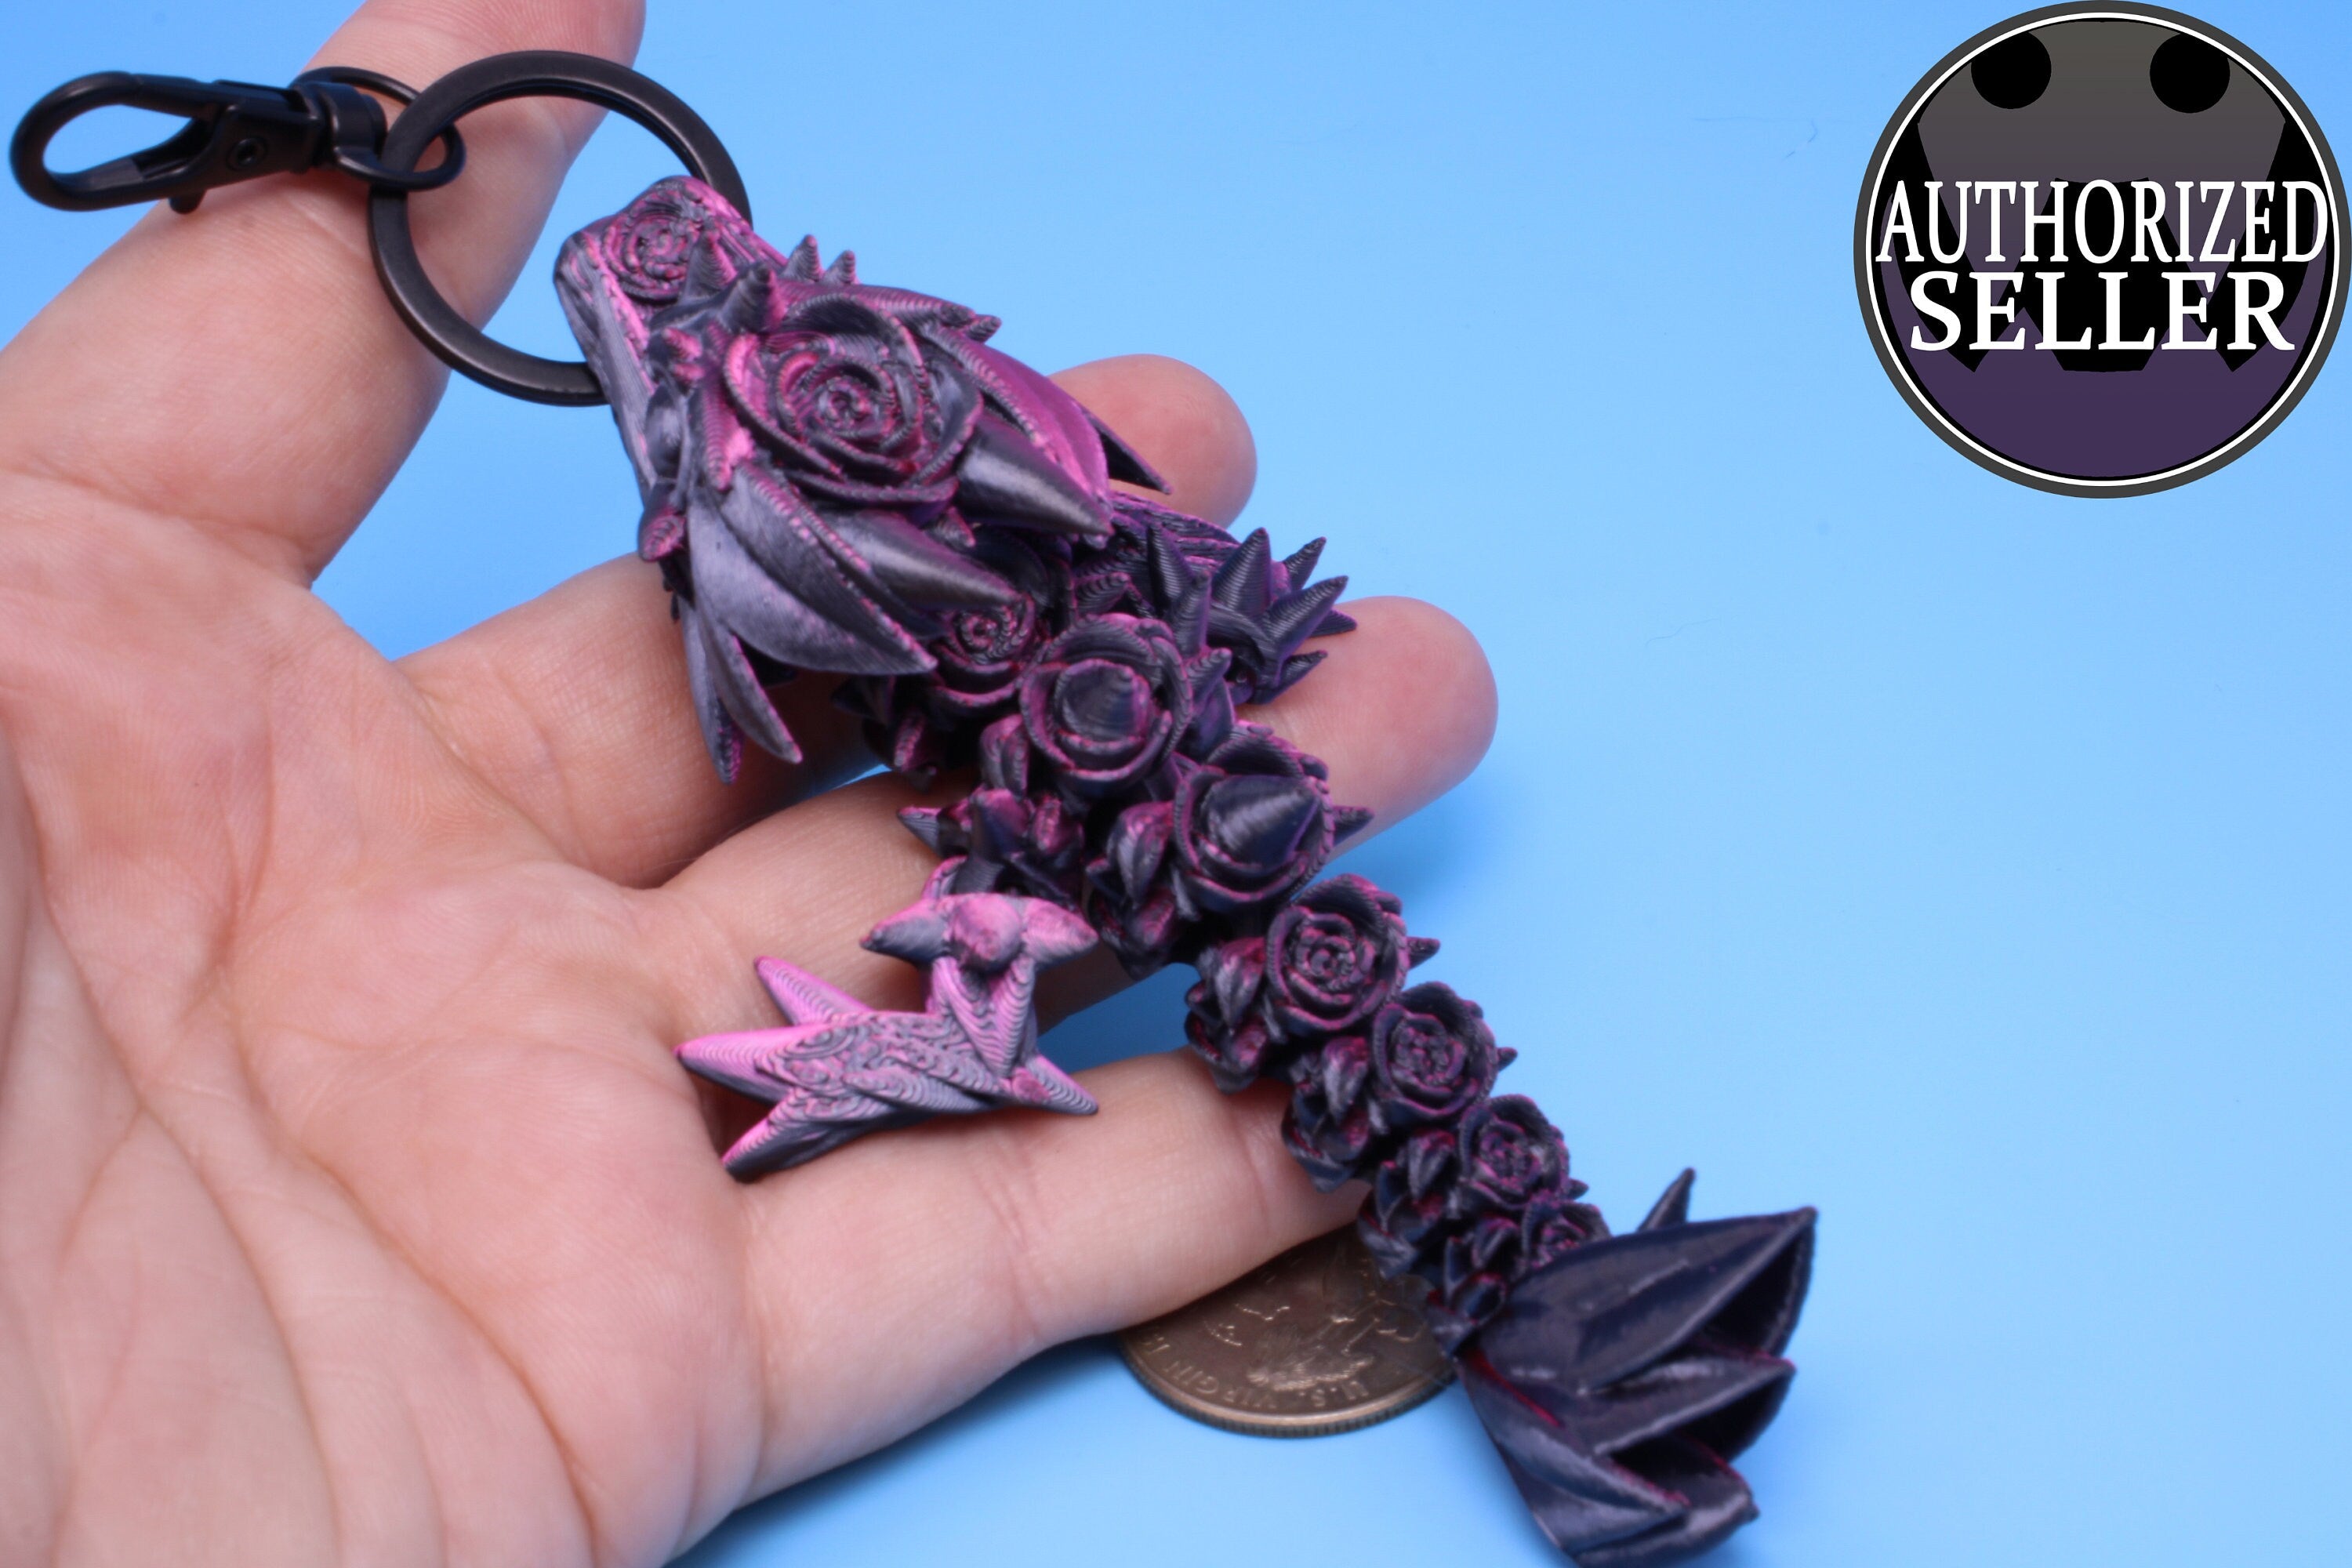 Baby Rose Dragon- Tadling Keychain | 3D Printed Rose Dragon | 4.75 inches Made to Order